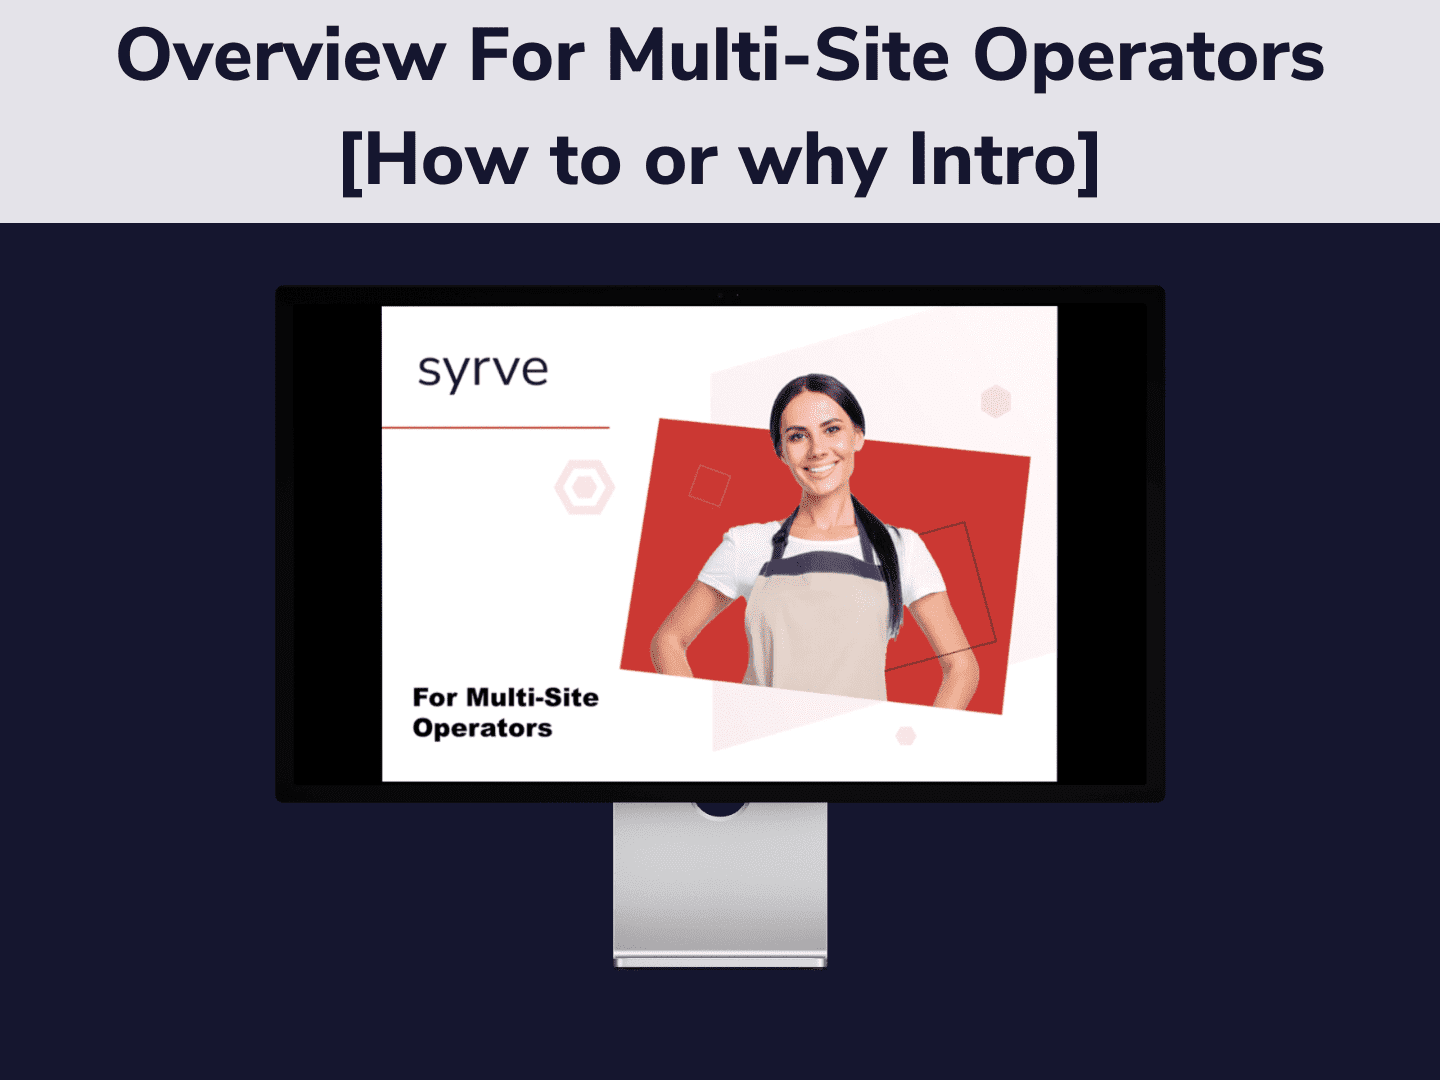 Overview For Multi-Site Operators [How to or why Intro]